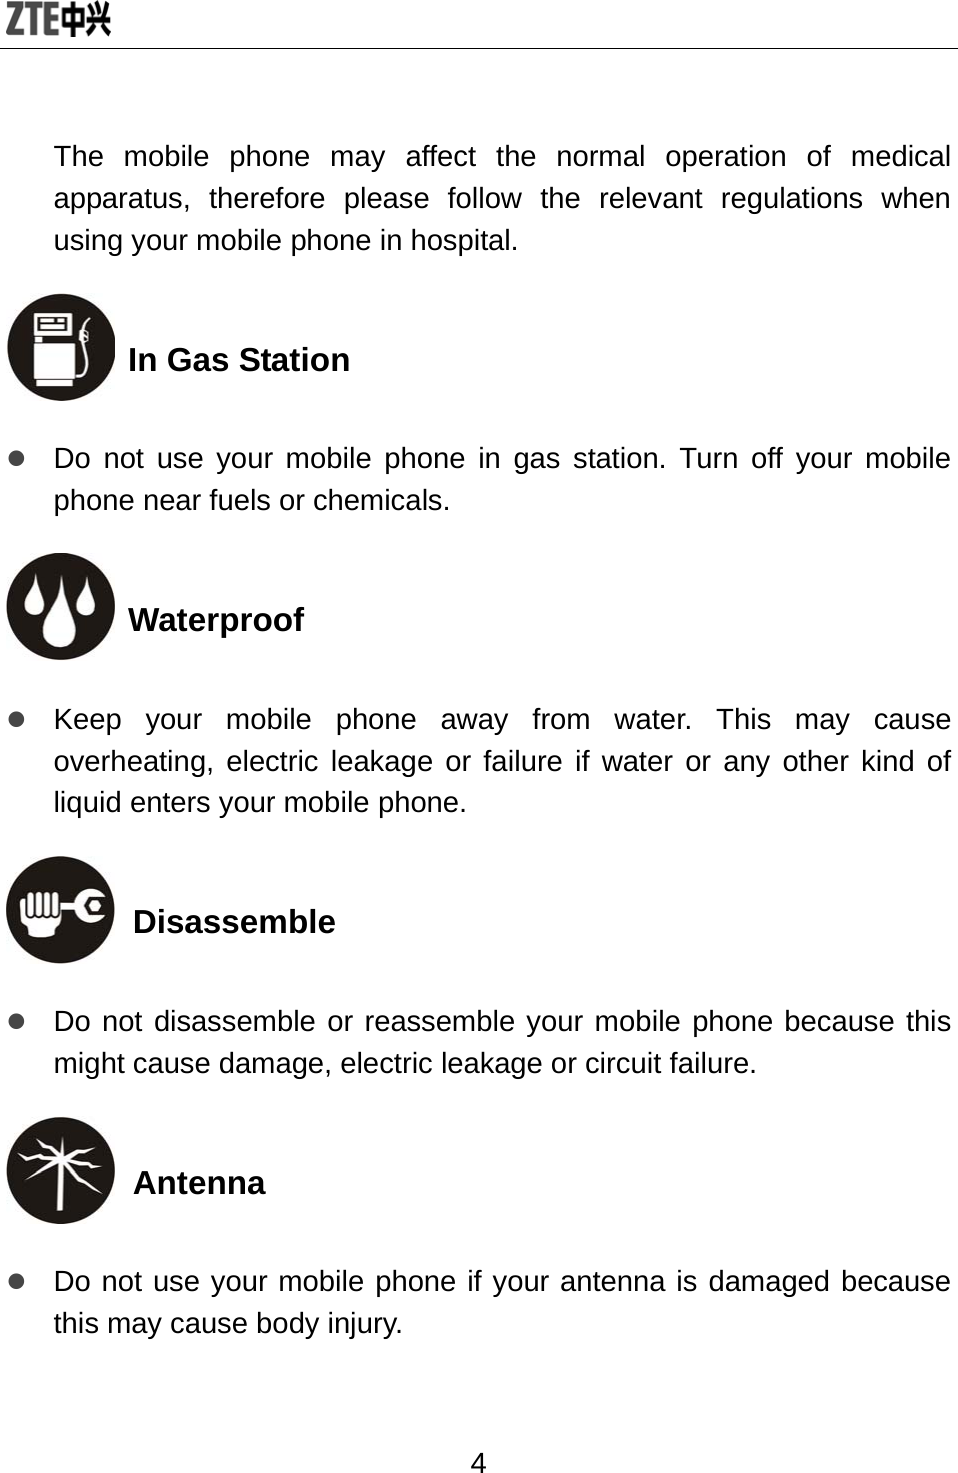  4 The mobile phone may affect the normal operation of medical apparatus, therefore please follow the relevant regulations when using your mobile phone in hospital.  In Gas Station z Do not use your mobile phone in gas station. Turn off your mobile phone near fuels or chemicals.  Waterproof z Keep your mobile phone away from water. This may cause overheating, electric leakage or failure if water or any other kind of liquid enters your mobile phone.  Disassemble z Do not disassemble or reassemble your mobile phone because this might cause damage, electric leakage or circuit failure.  Antenna z Do not use your mobile phone if your antenna is damaged because this may cause body injury. 